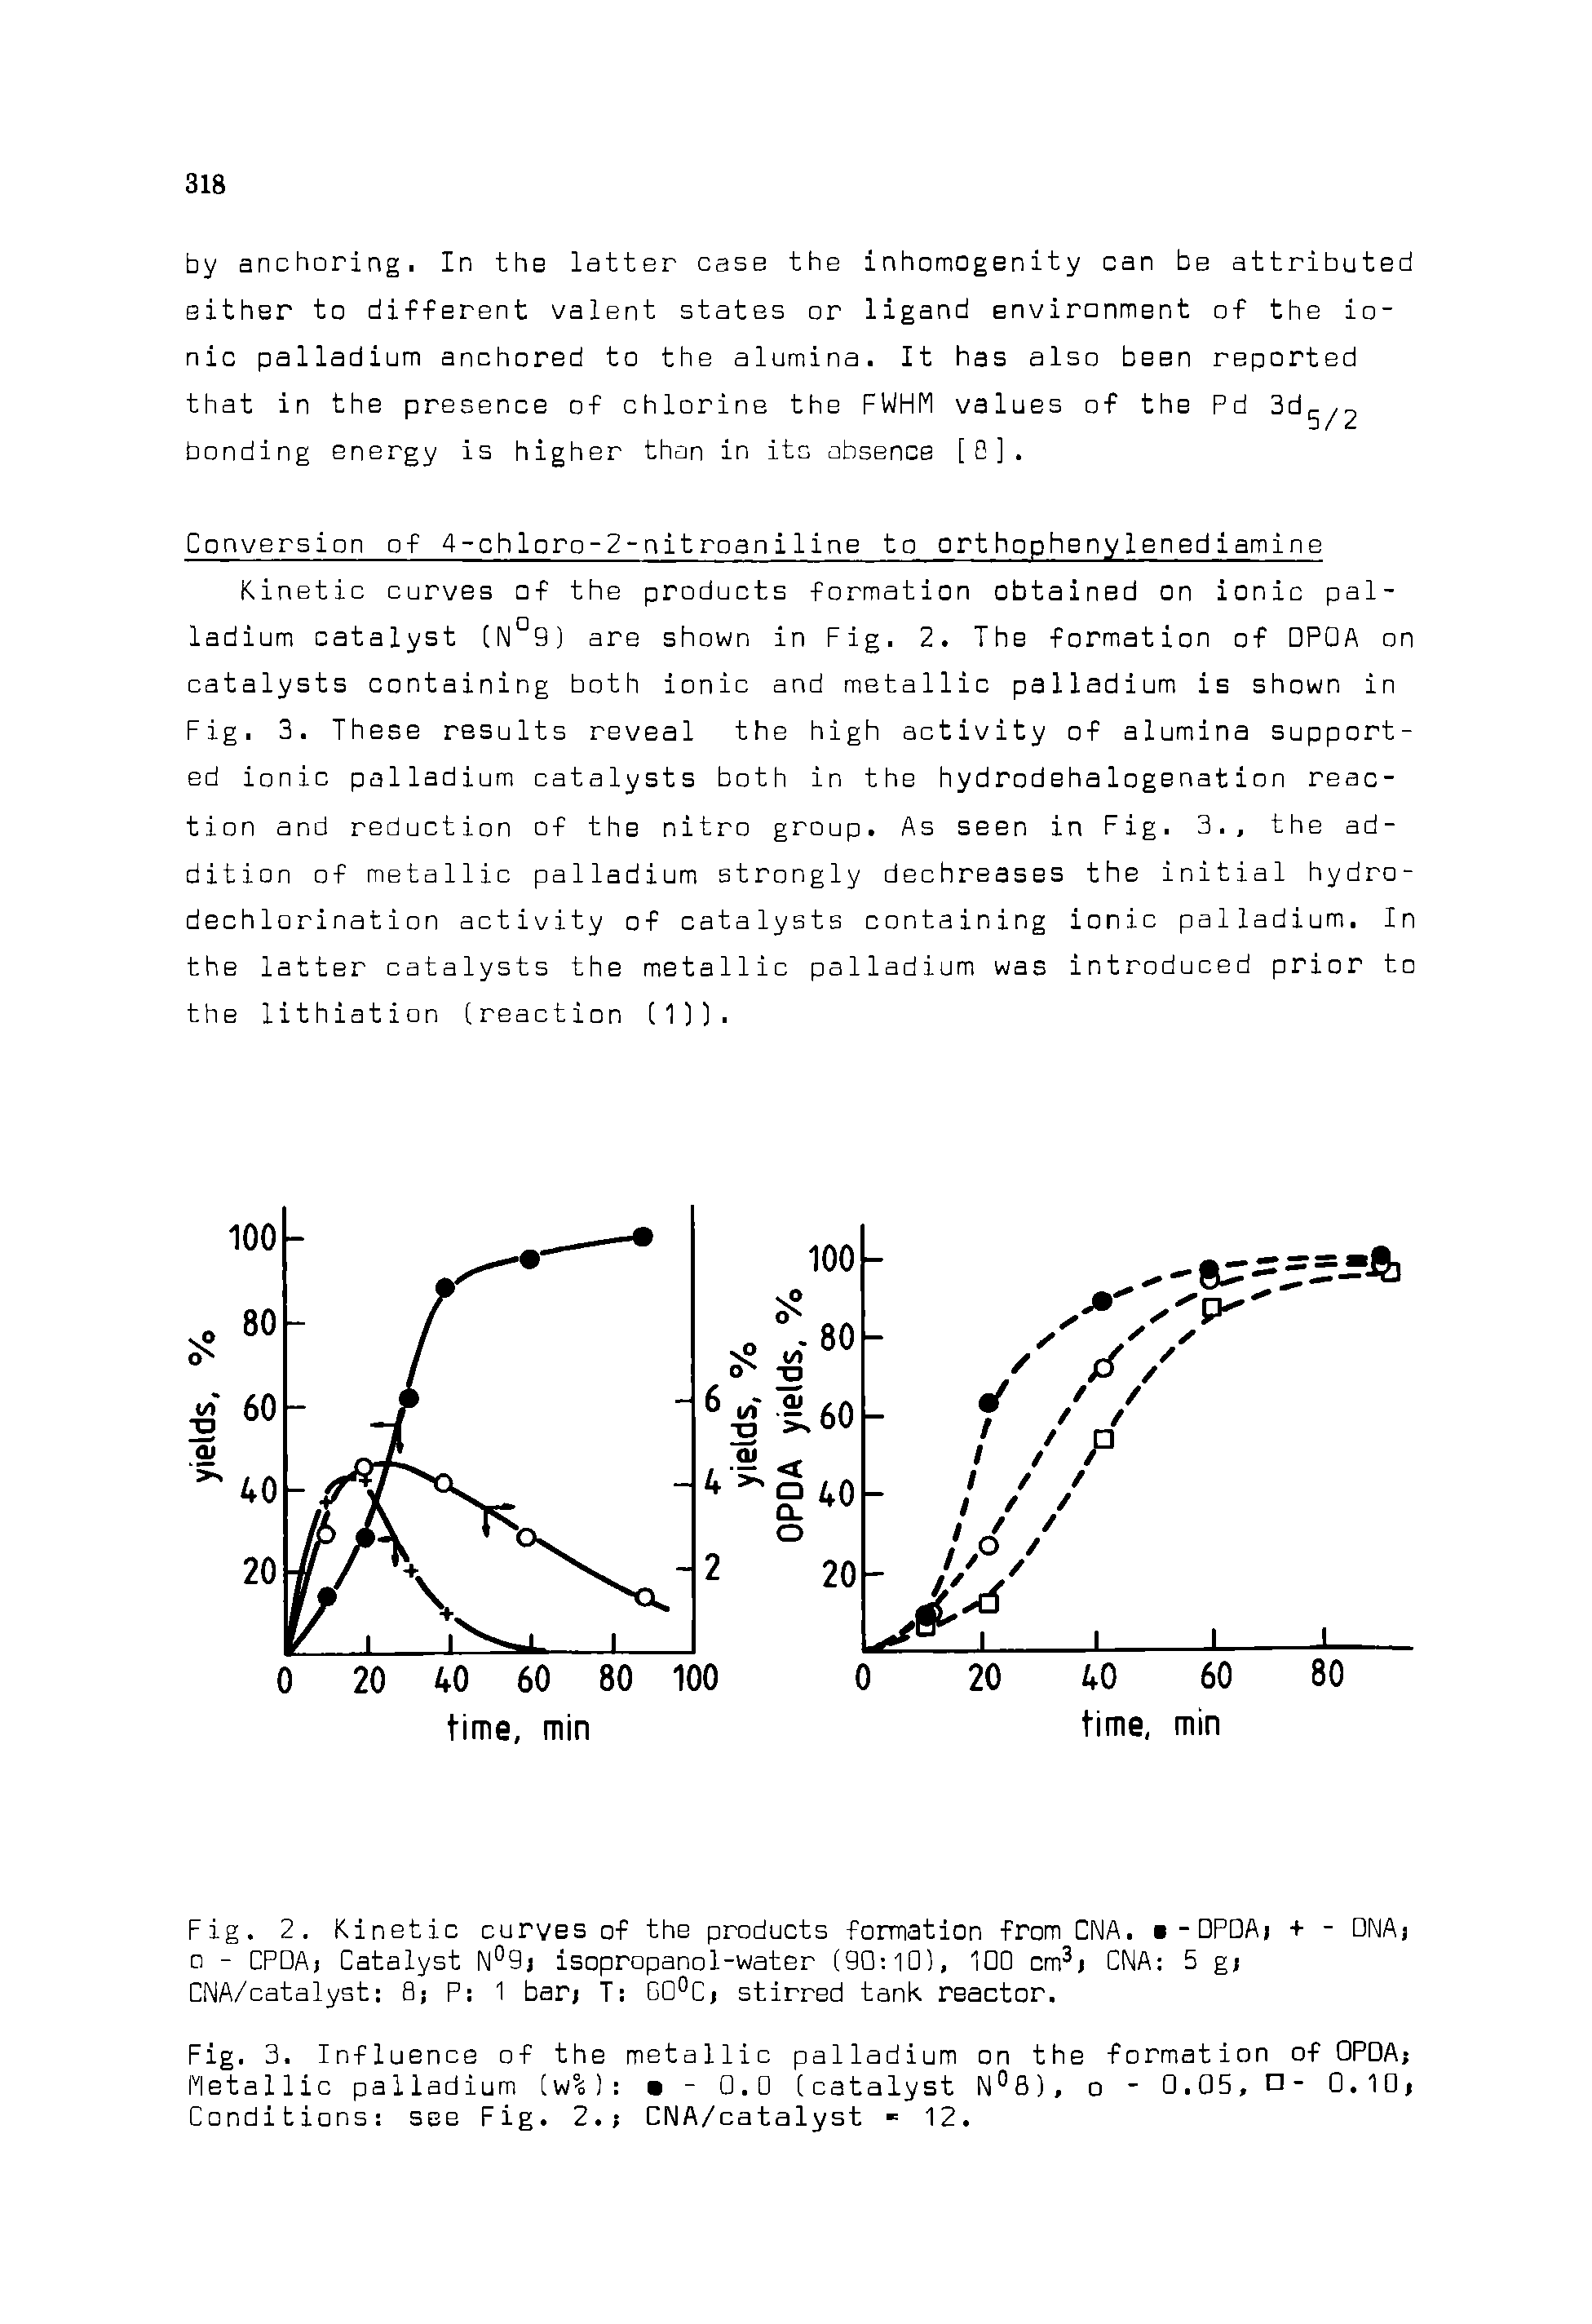 Fig. 2. Kinetic curves of the products formation from CNA. b-DPOAi + - DNAj o - CPDAj Catalyst N°9j isopropanol-water (90 10), 100 cm3j CNA 5 gj CNA/catalyst 0 P 1 bar T G0°Cj stirred tank reactor.